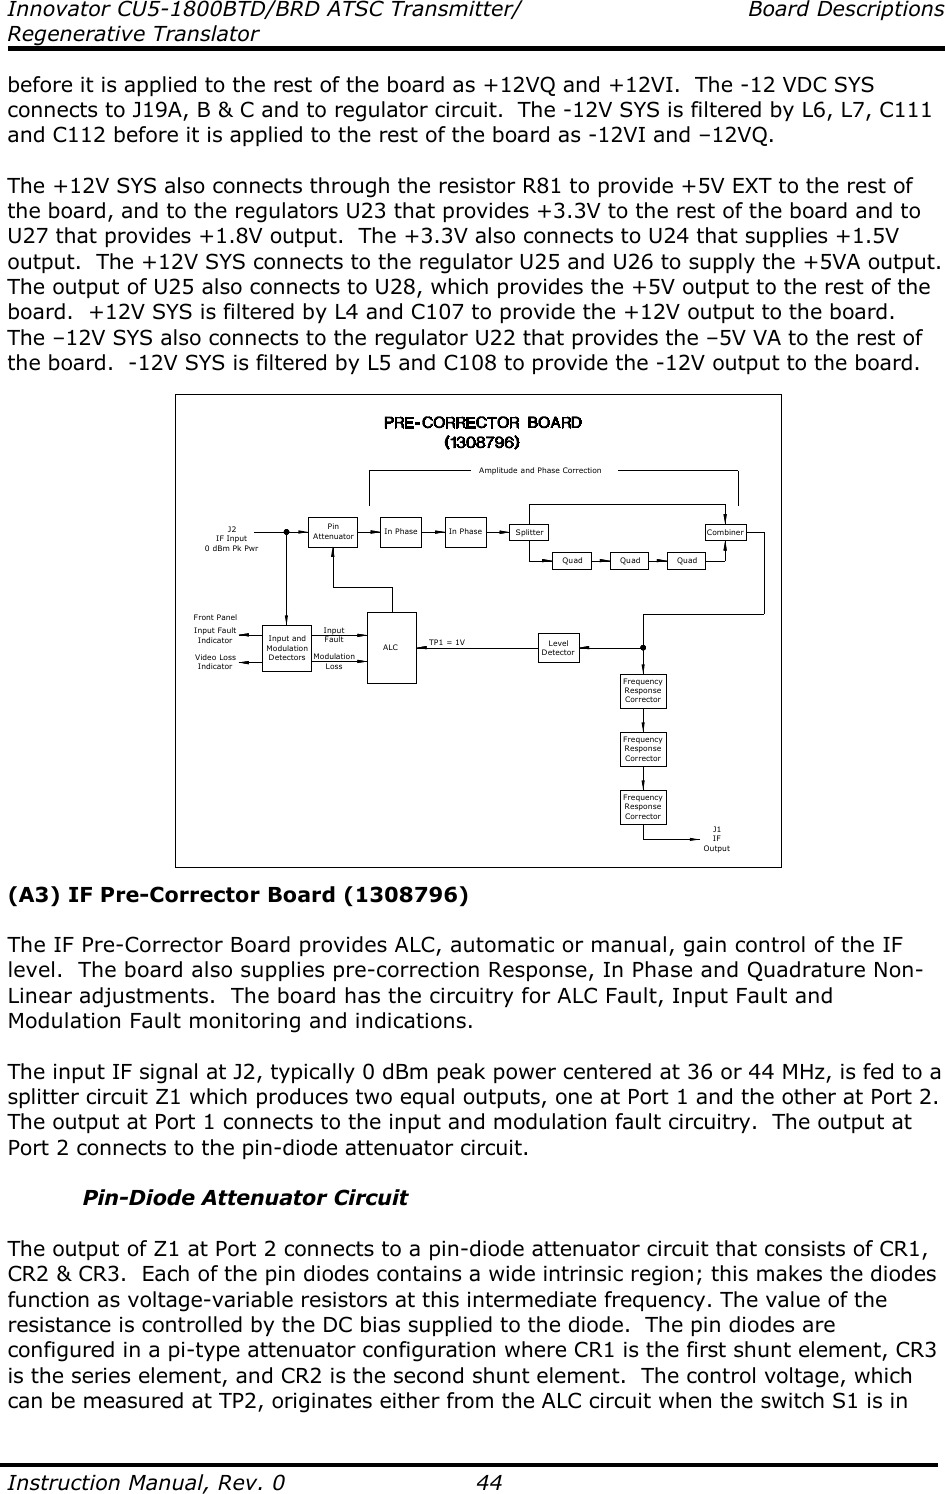 Innovator CU5-1800BTD/BRD ATSC Transmitter/  Board Descriptions Regenerative Translator  Instruction Manual, Rev. 0    44 before it is applied to the rest of the board as +12VQ and +12VI.  The -12 VDC SYS connects to J19A, B &amp; C and to regulator circuit.  The -12V SYS is filtered by L6, L7, C111 and C112 before it is applied to the rest of the board as -12VI and –12VQ.  The +12V SYS also connects through the resistor R81 to provide +5V EXT to the rest of the board, and to the regulators U23 that provides +3.3V to the rest of the board and to U27 that provides +1.8V output.  The +3.3V also connects to U24 that supplies +1.5V output.  The +12V SYS connects to the regulator U25 and U26 to supply the +5VA output.  The output of U25 also connects to U28, which provides the +5V output to the rest of the board.  +12V SYS is filtered by L4 and C107 to provide the +12V output to the board.  The –12V SYS also connects to the regulator U22 that provides the –5V VA to the rest of the board.  -12V SYS is filtered by L5 and C108 to provide the -12V output to the board. J2IF Input0 dBm Pk PwrPinAttenuator In Phase In Phase SplitterQuad Quad QuadCombinerAmplitude and Phase CorrectionInput andModulationDetectorsInput FaultIndicatorVideo LossIndicatorFront PanelALCInputFaultModulationLossLevelDetectorTP1 = 1VFrequencyResponseCorrectorFrequencyResponseCorrectorFrequencyResponseCorrectorJ1IFOutput (A3) IF Pre-Corrector Board (1308796)  The IF Pre-Corrector Board provides ALC, automatic or manual, gain control of the IF level.  The board also supplies pre-correction Response, In Phase and Quadrature Non-Linear adjustments.  The board has the circuitry for ALC Fault, Input Fault and Modulation Fault monitoring and indications.  The input IF signal at J2, typically 0 dBm peak power centered at 36 or 44 MHz, is fed to a splitter circuit Z1 which produces two equal outputs, one at Port 1 and the other at Port 2.  The output at Port 1 connects to the input and modulation fault circuitry.  The output at Port 2 connects to the pin-diode attenuator circuit.  Pin-Diode Attenuator Circuit  The output of Z1 at Port 2 connects to a pin-diode attenuator circuit that consists of CR1, CR2 &amp; CR3.  Each of the pin diodes contains a wide intrinsic region; this makes the diodes function as voltage-variable resistors at this intermediate frequency. The value of the resistance is controlled by the DC bias supplied to the diode.  The pin diodes are configured in a pi-type attenuator configuration where CR1 is the first shunt element, CR3 is the series element, and CR2 is the second shunt element.  The control voltage, which can be measured at TP2, originates either from the ALC circuit when the switch S1 is in 